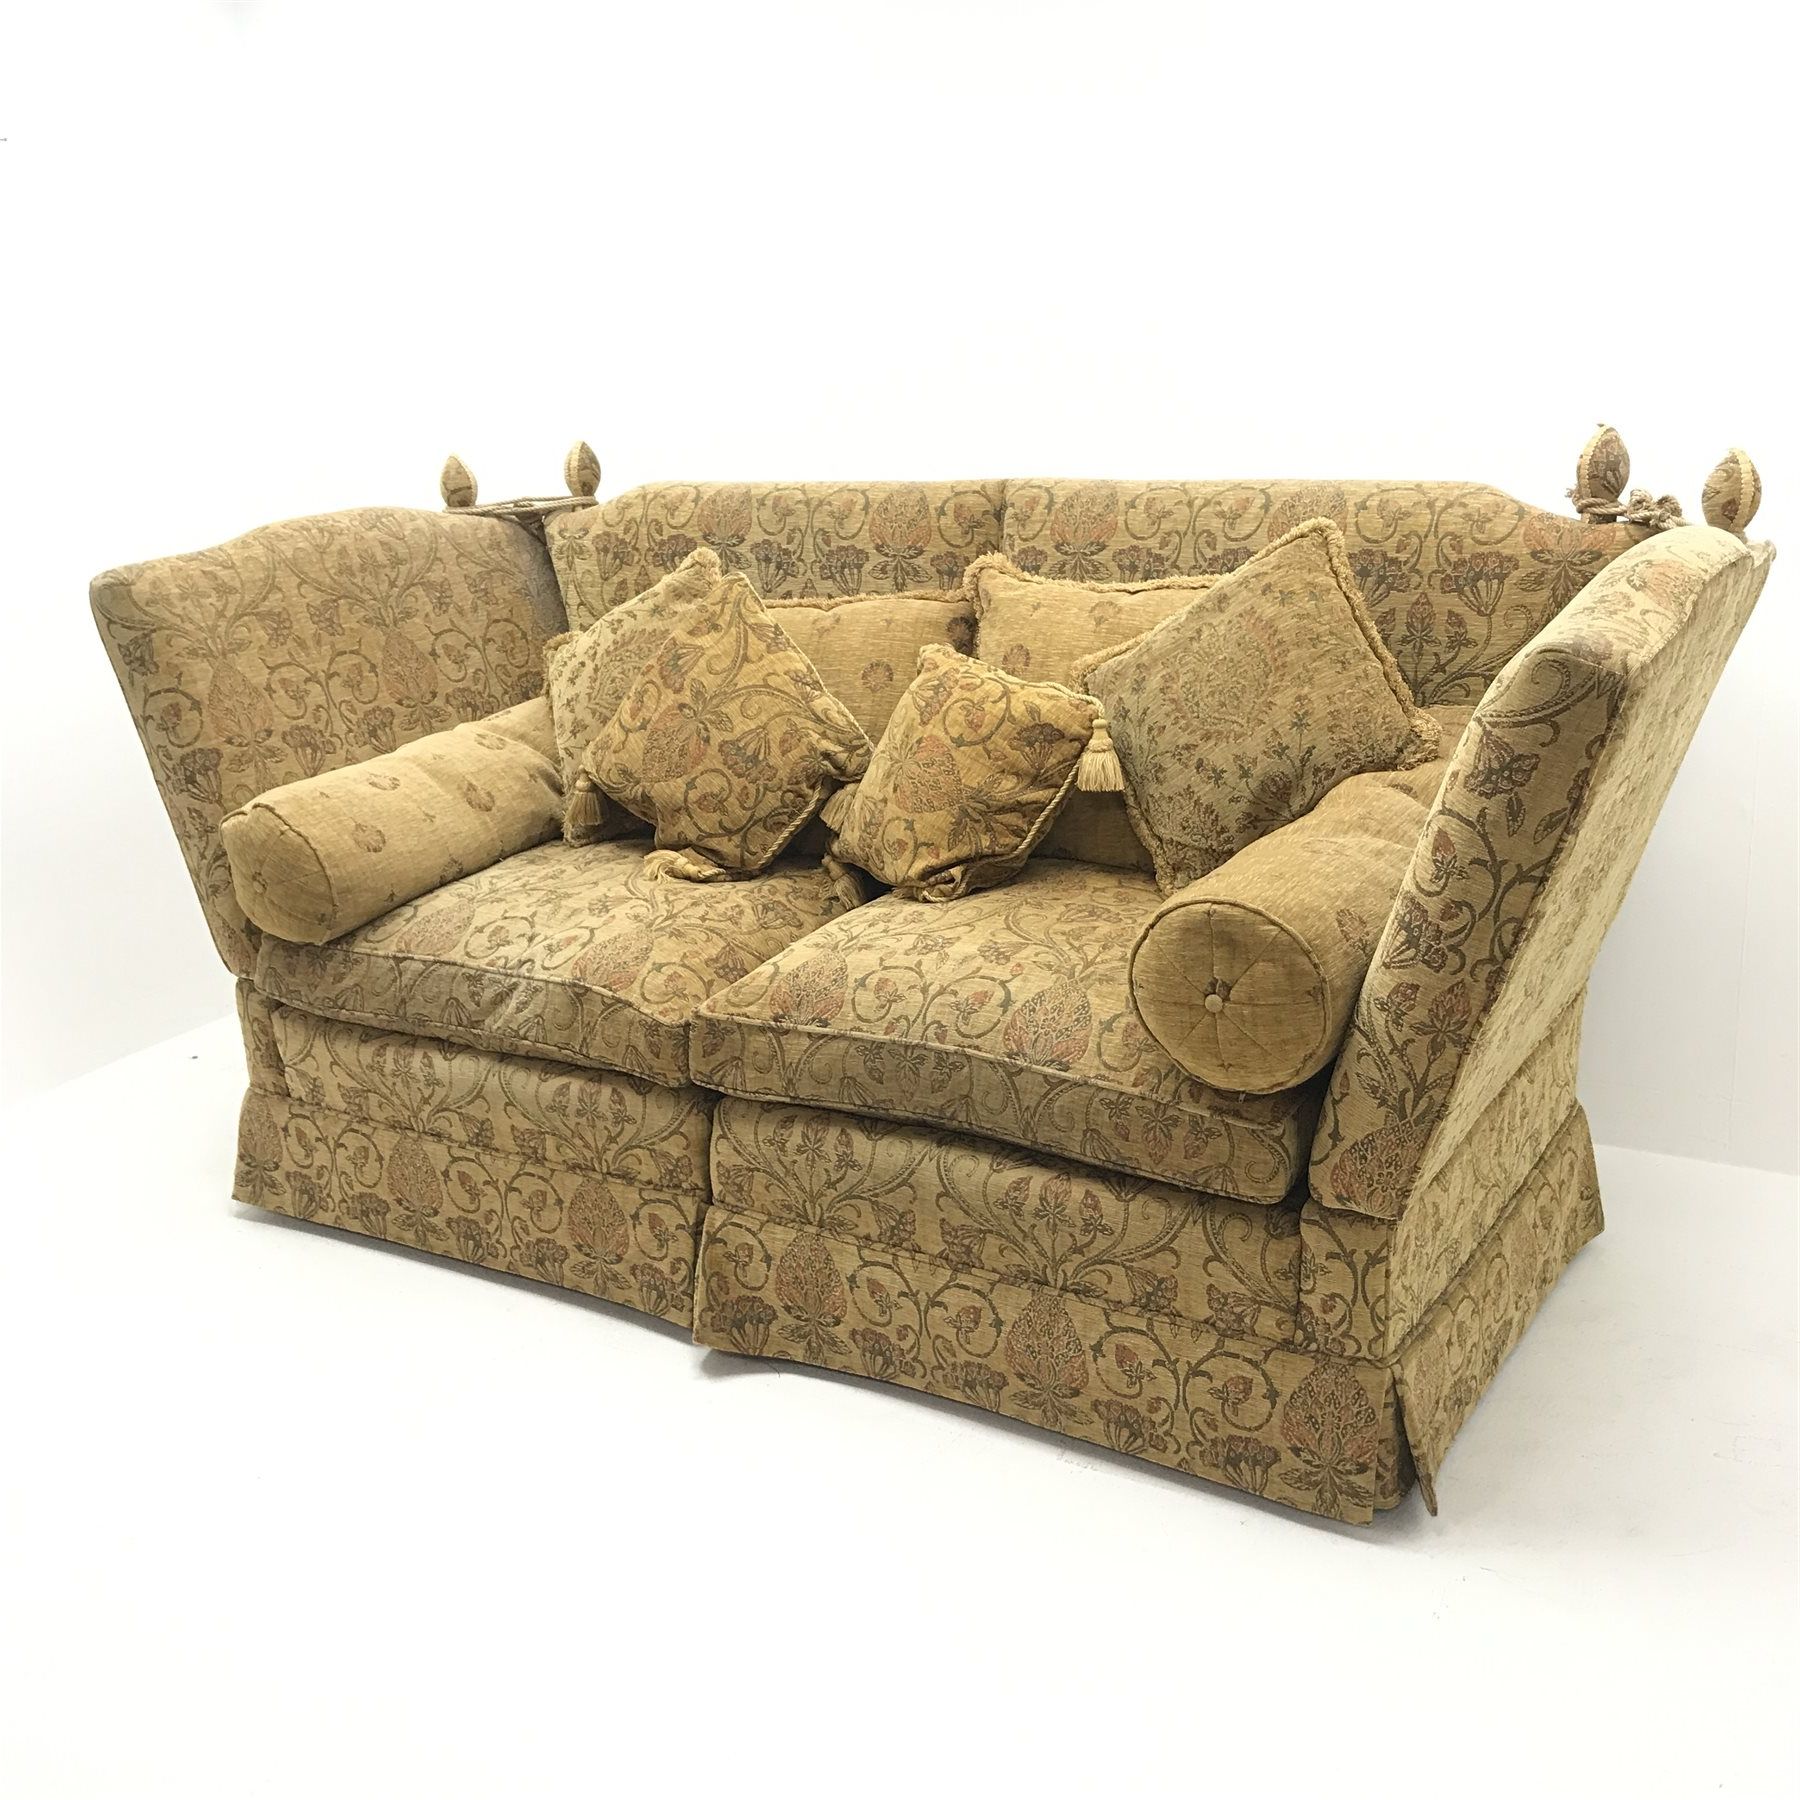 Knowle Style Two Seat Sofa, Upholstered In Traditional Floral Patterned Inside Sofas In Pattern (View 10 of 20)